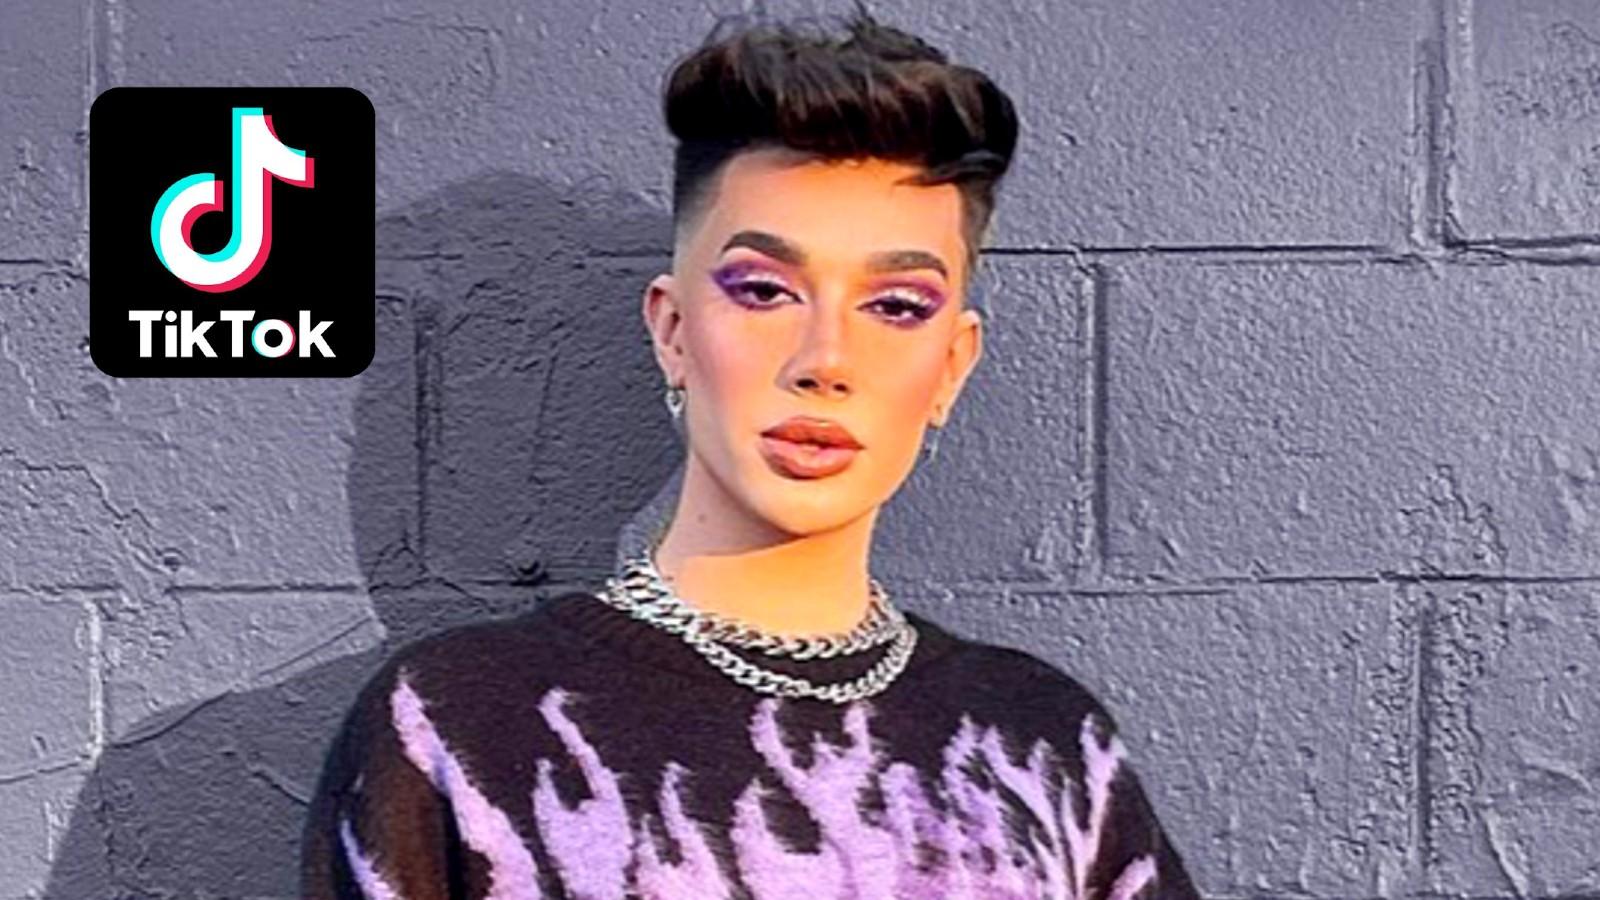 James Charles stands against a purple wall